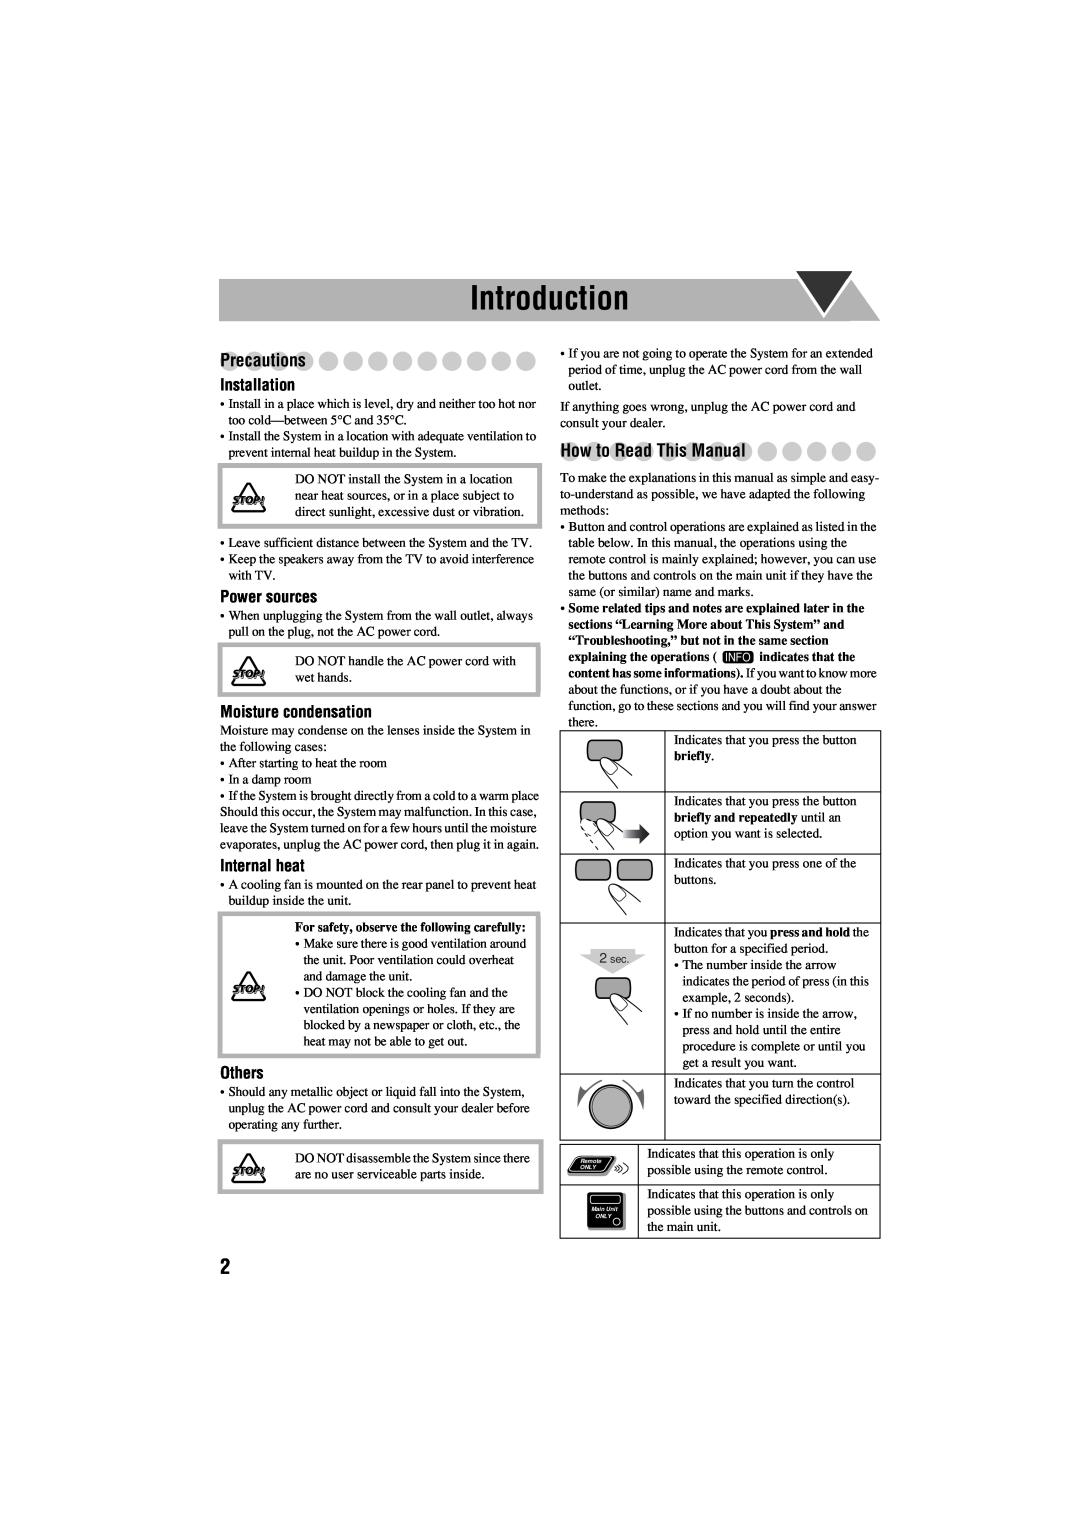 JVC GVT0125-003A Introduction, Precautions, How to Read This Manual, Installation, Power sources, Moisture condensation 